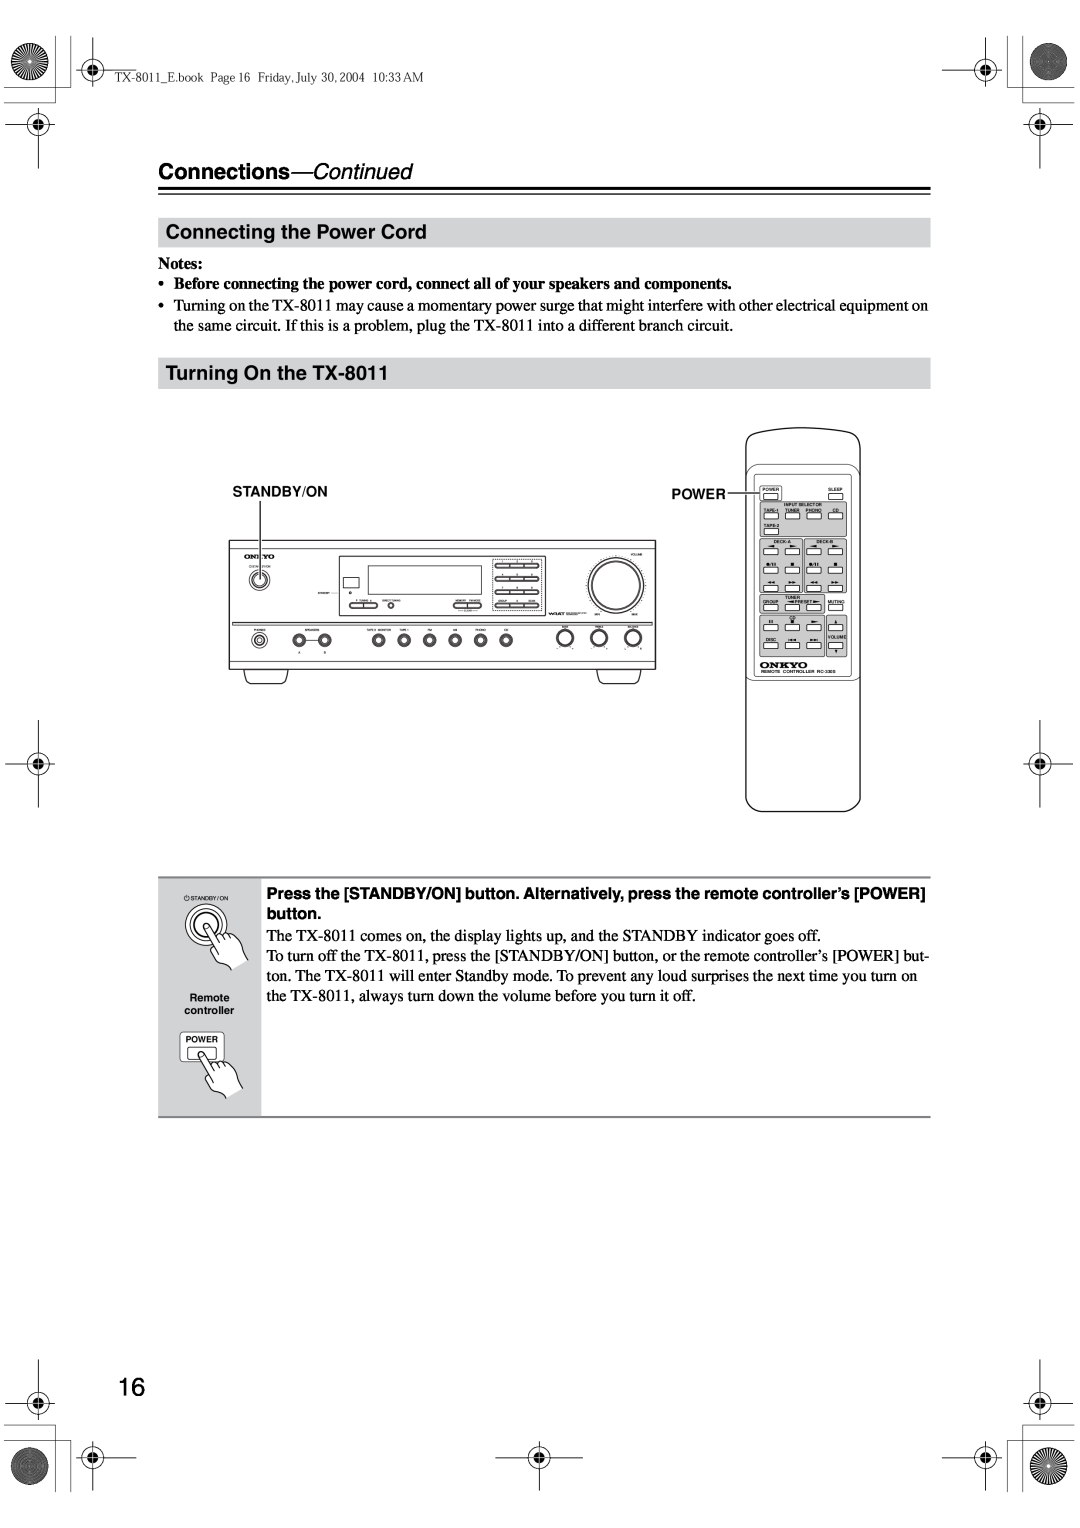 Onkyo instruction manual Connecting the Power Cord, Turning On the TX-8011, Connections-Continued 